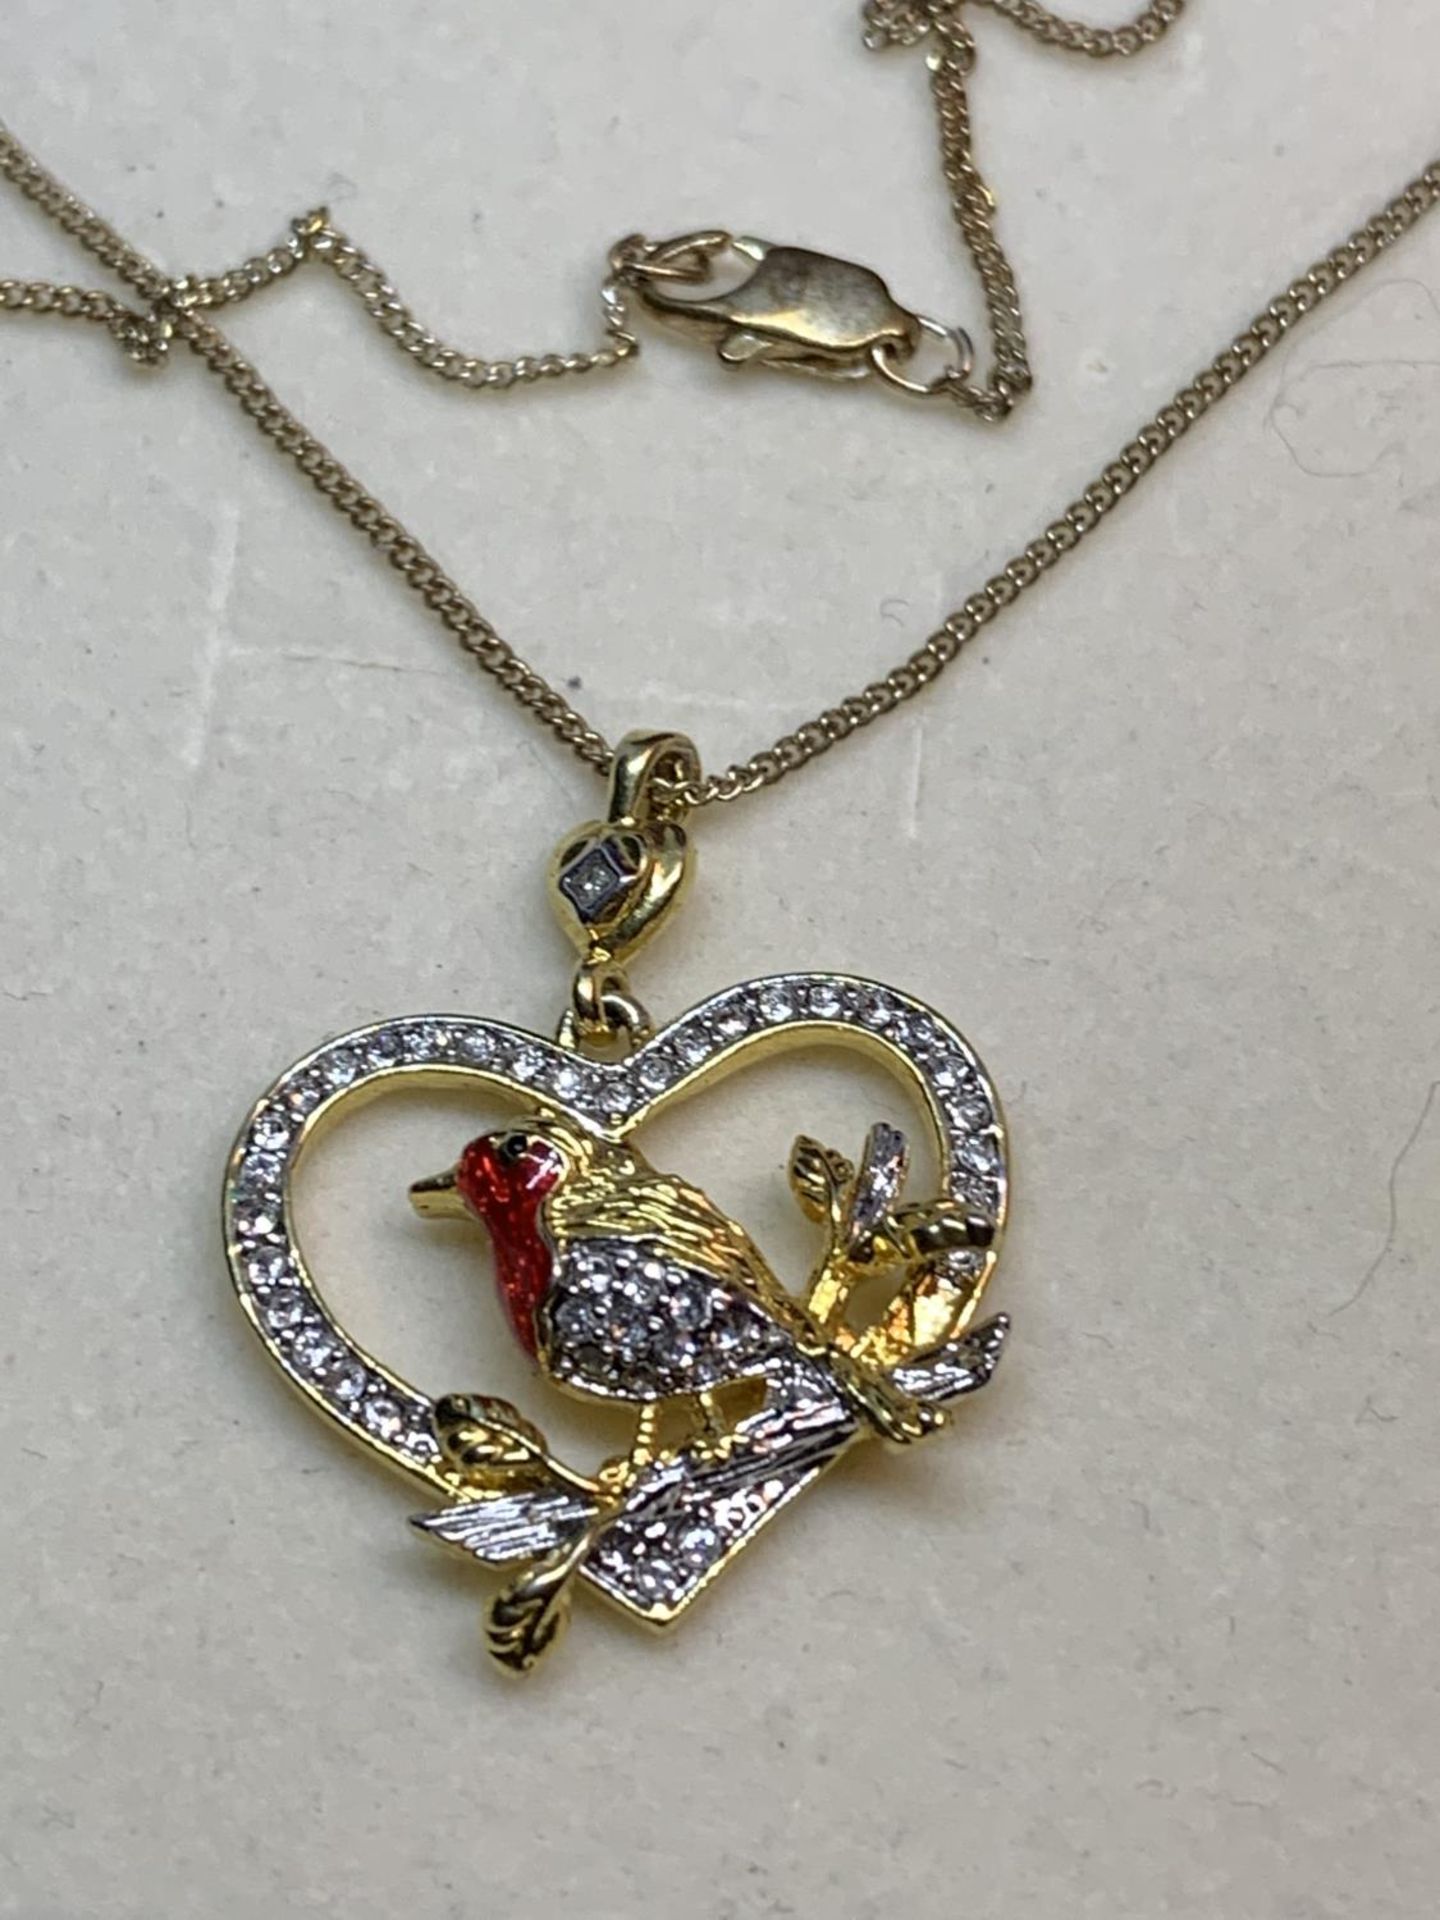 A NECKLACE WITH A CRYSTAL ROBIN PENDANT IN A PRESENTATION BOX - Image 3 of 3